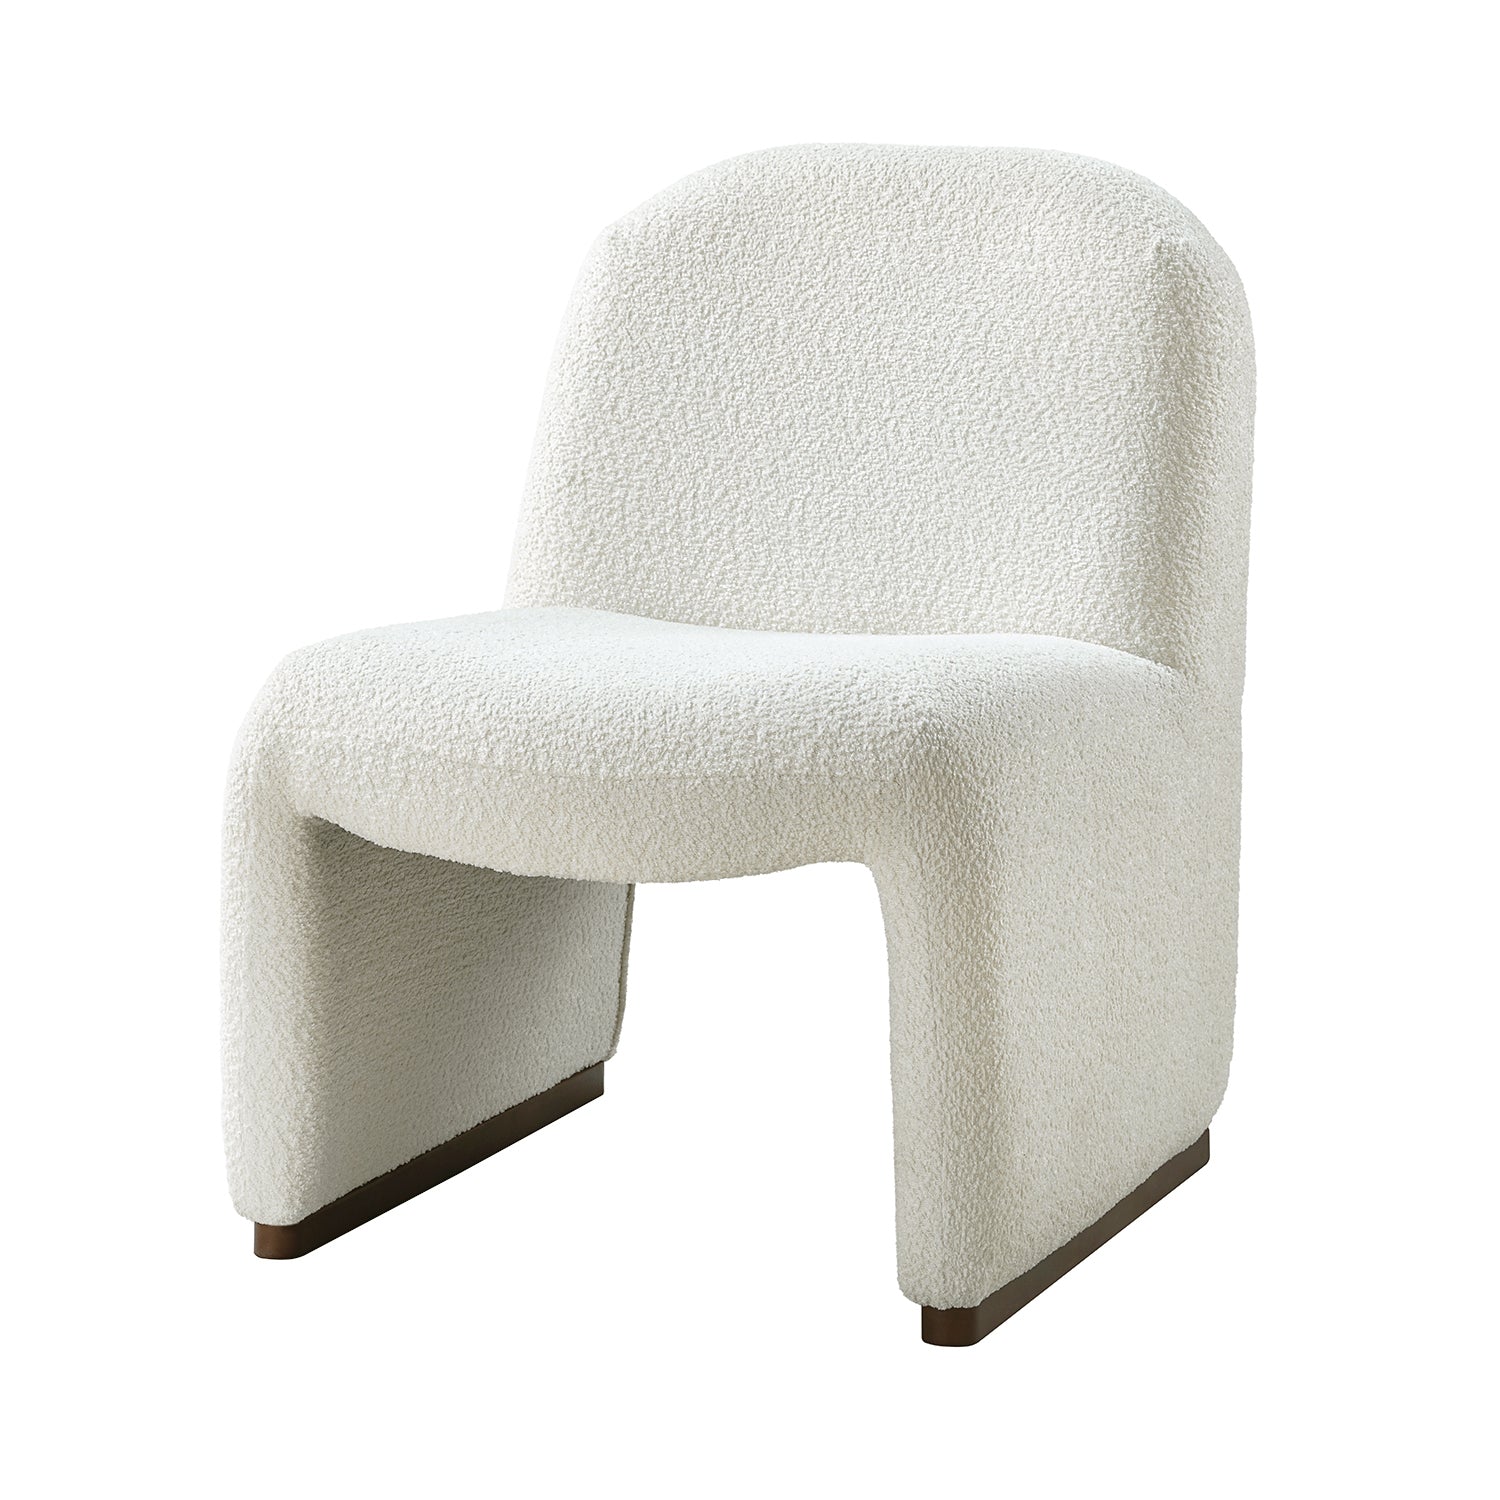 MAICOSY Side Chair - Ivory